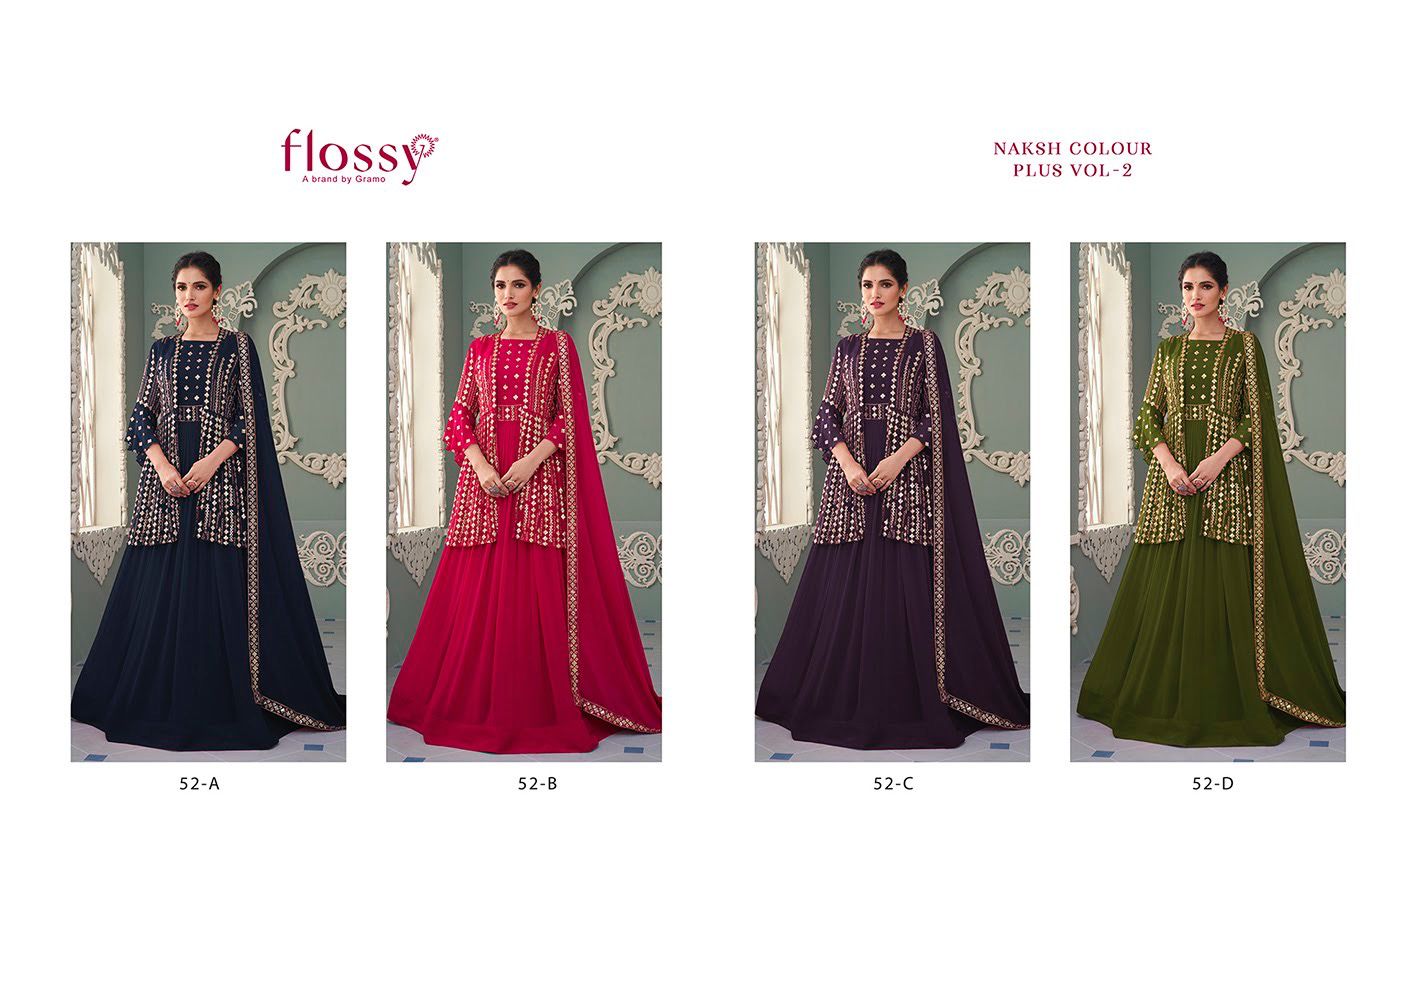 FLOSSY NAKSH VOL 2 SUITS Anant Tex Exports Private Limited